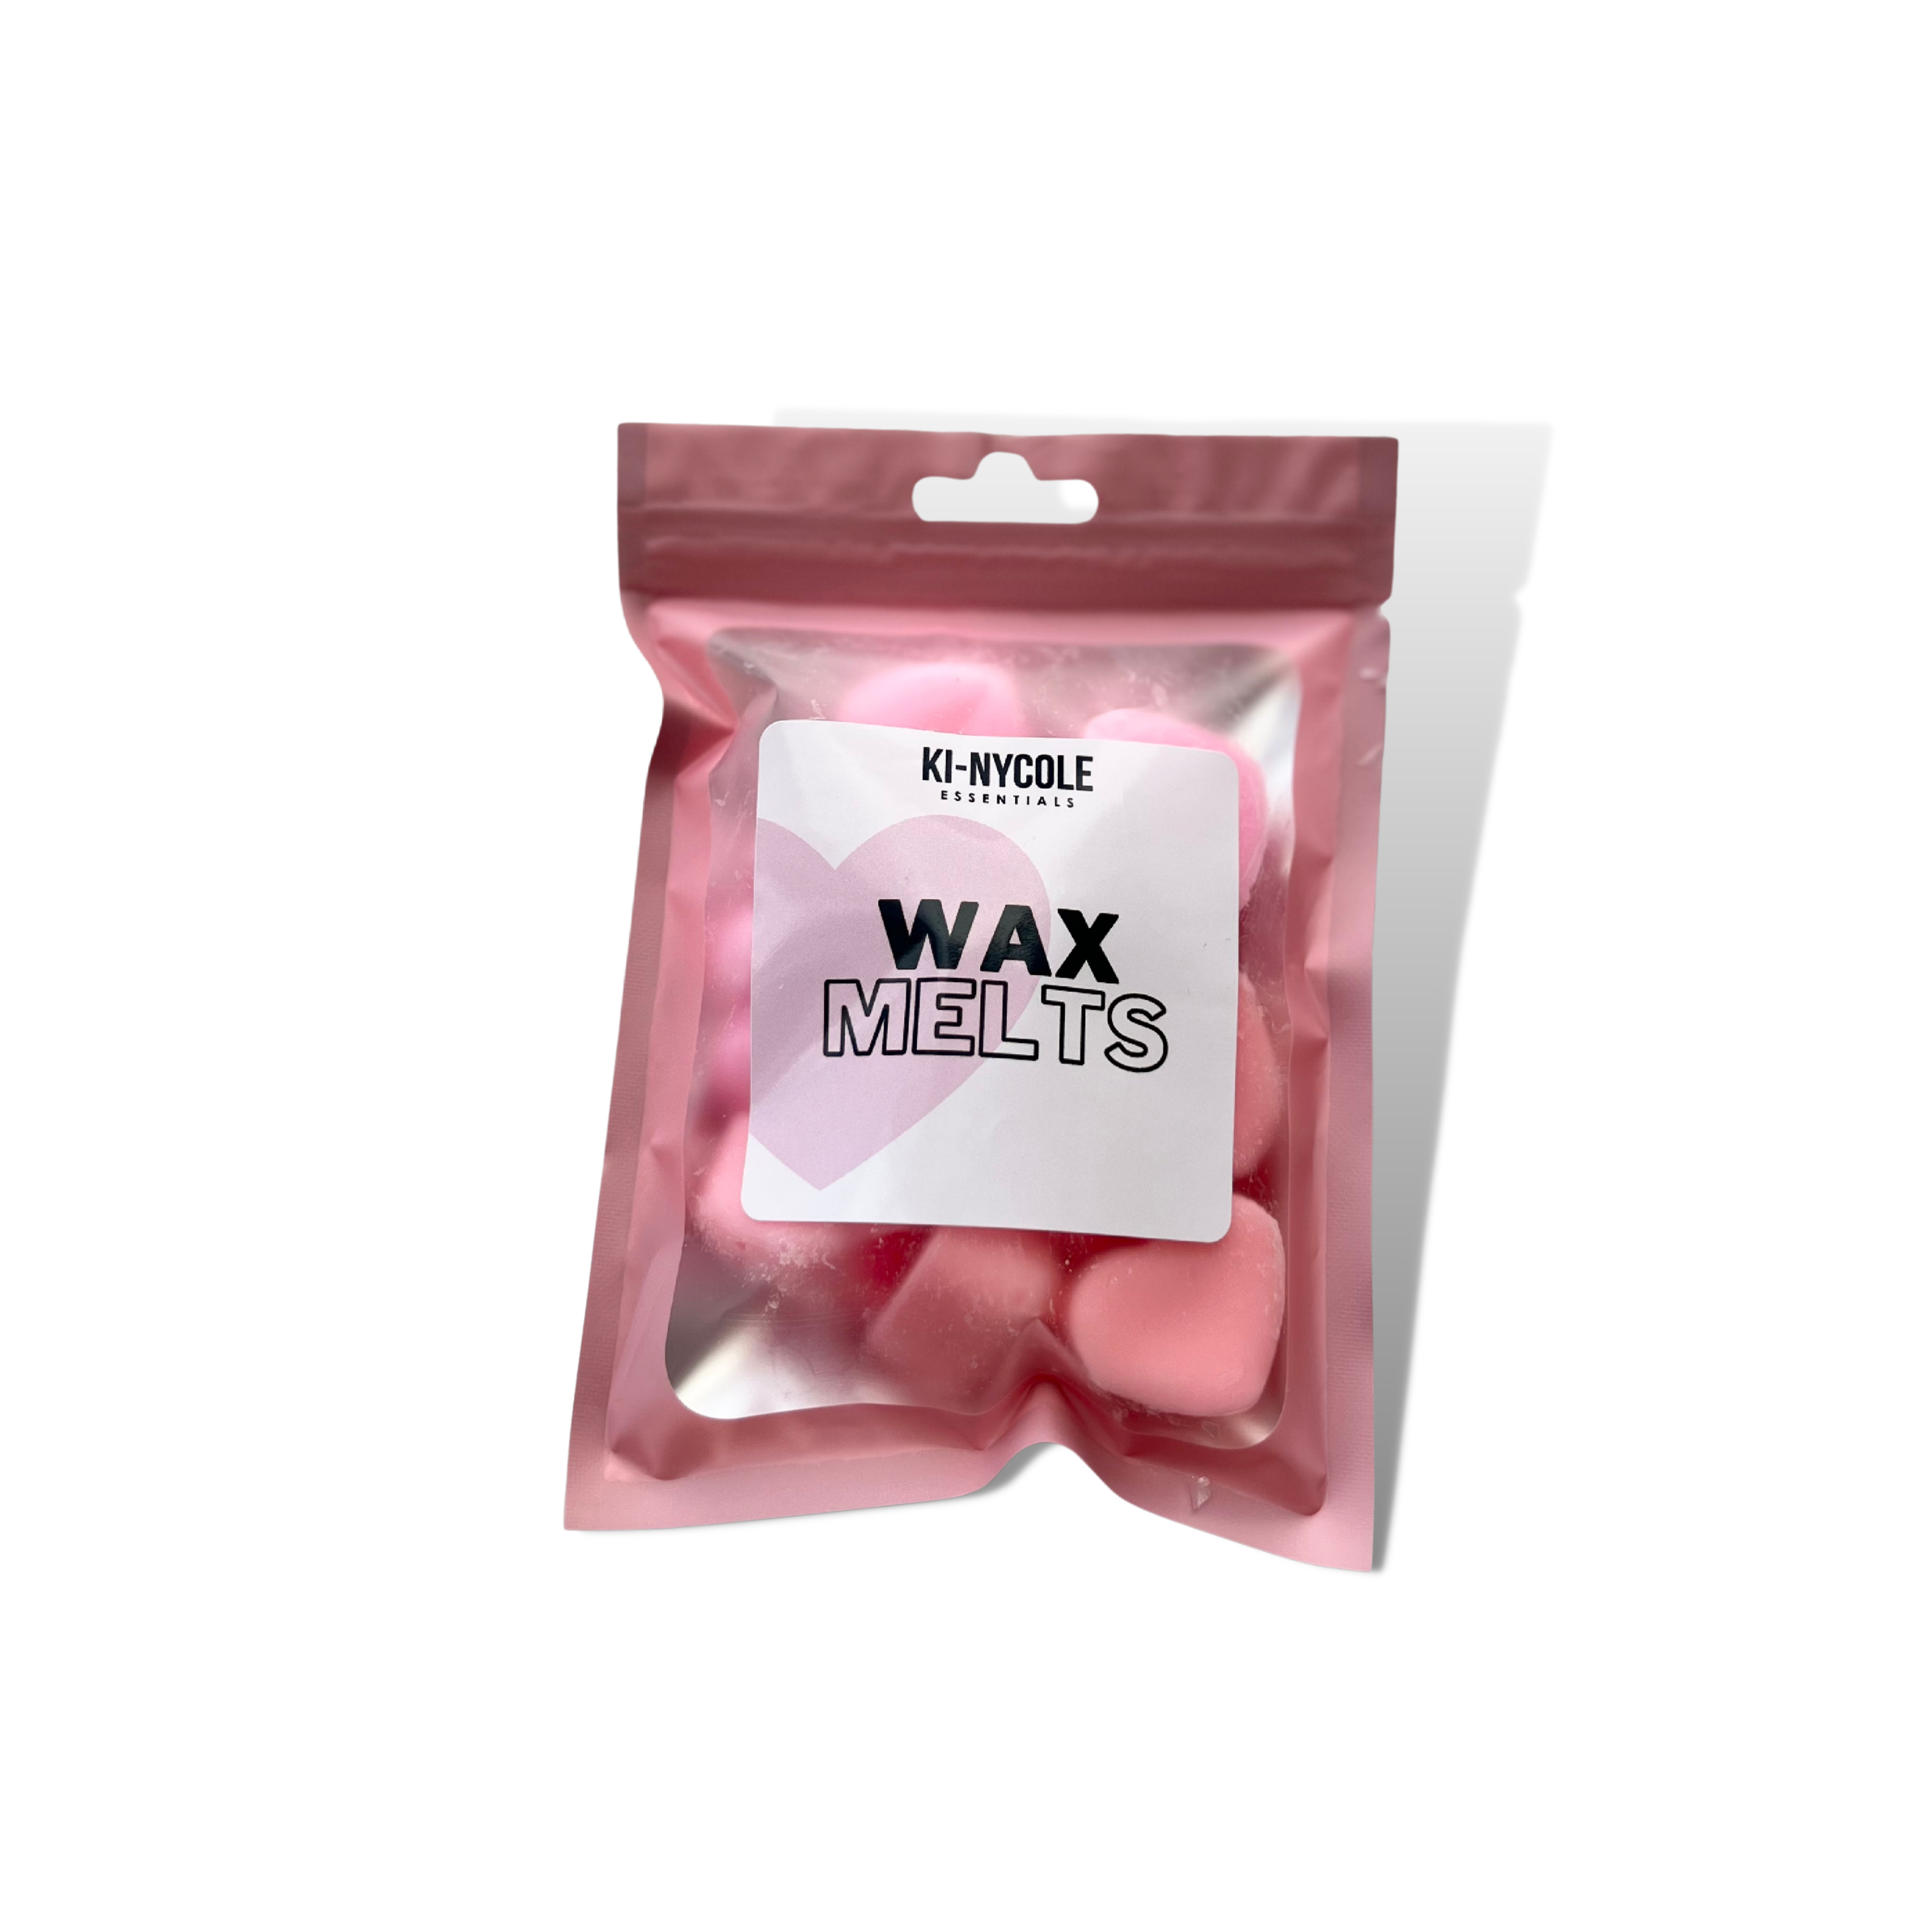 Cinnamon Candy Melts  Soy Wax Melts – Kinsley Mae Candle co.